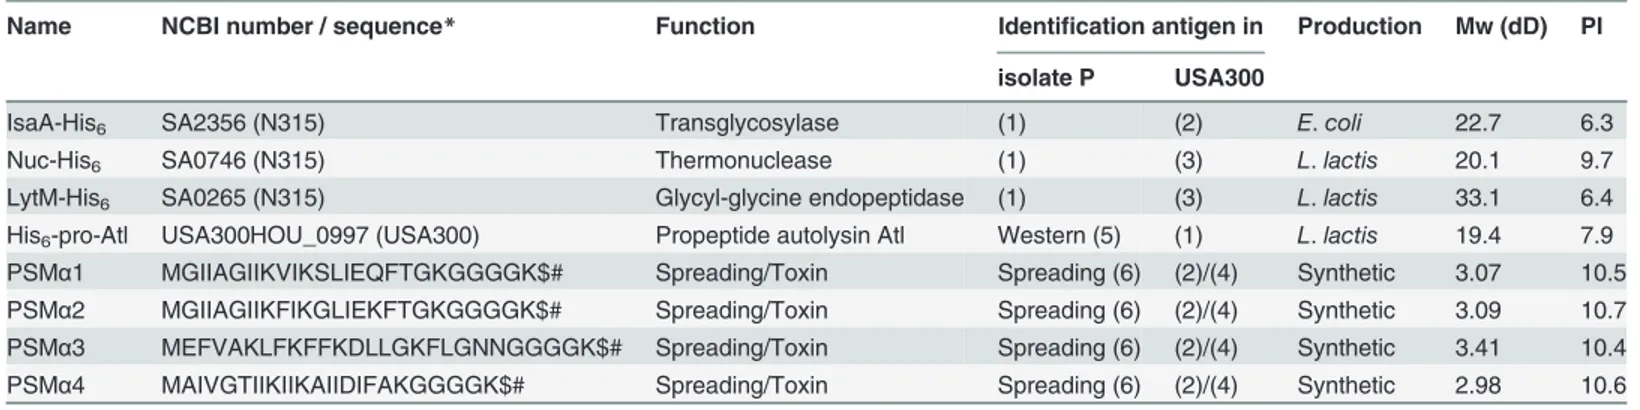 Table 2. Proteins and peptides used in this study.